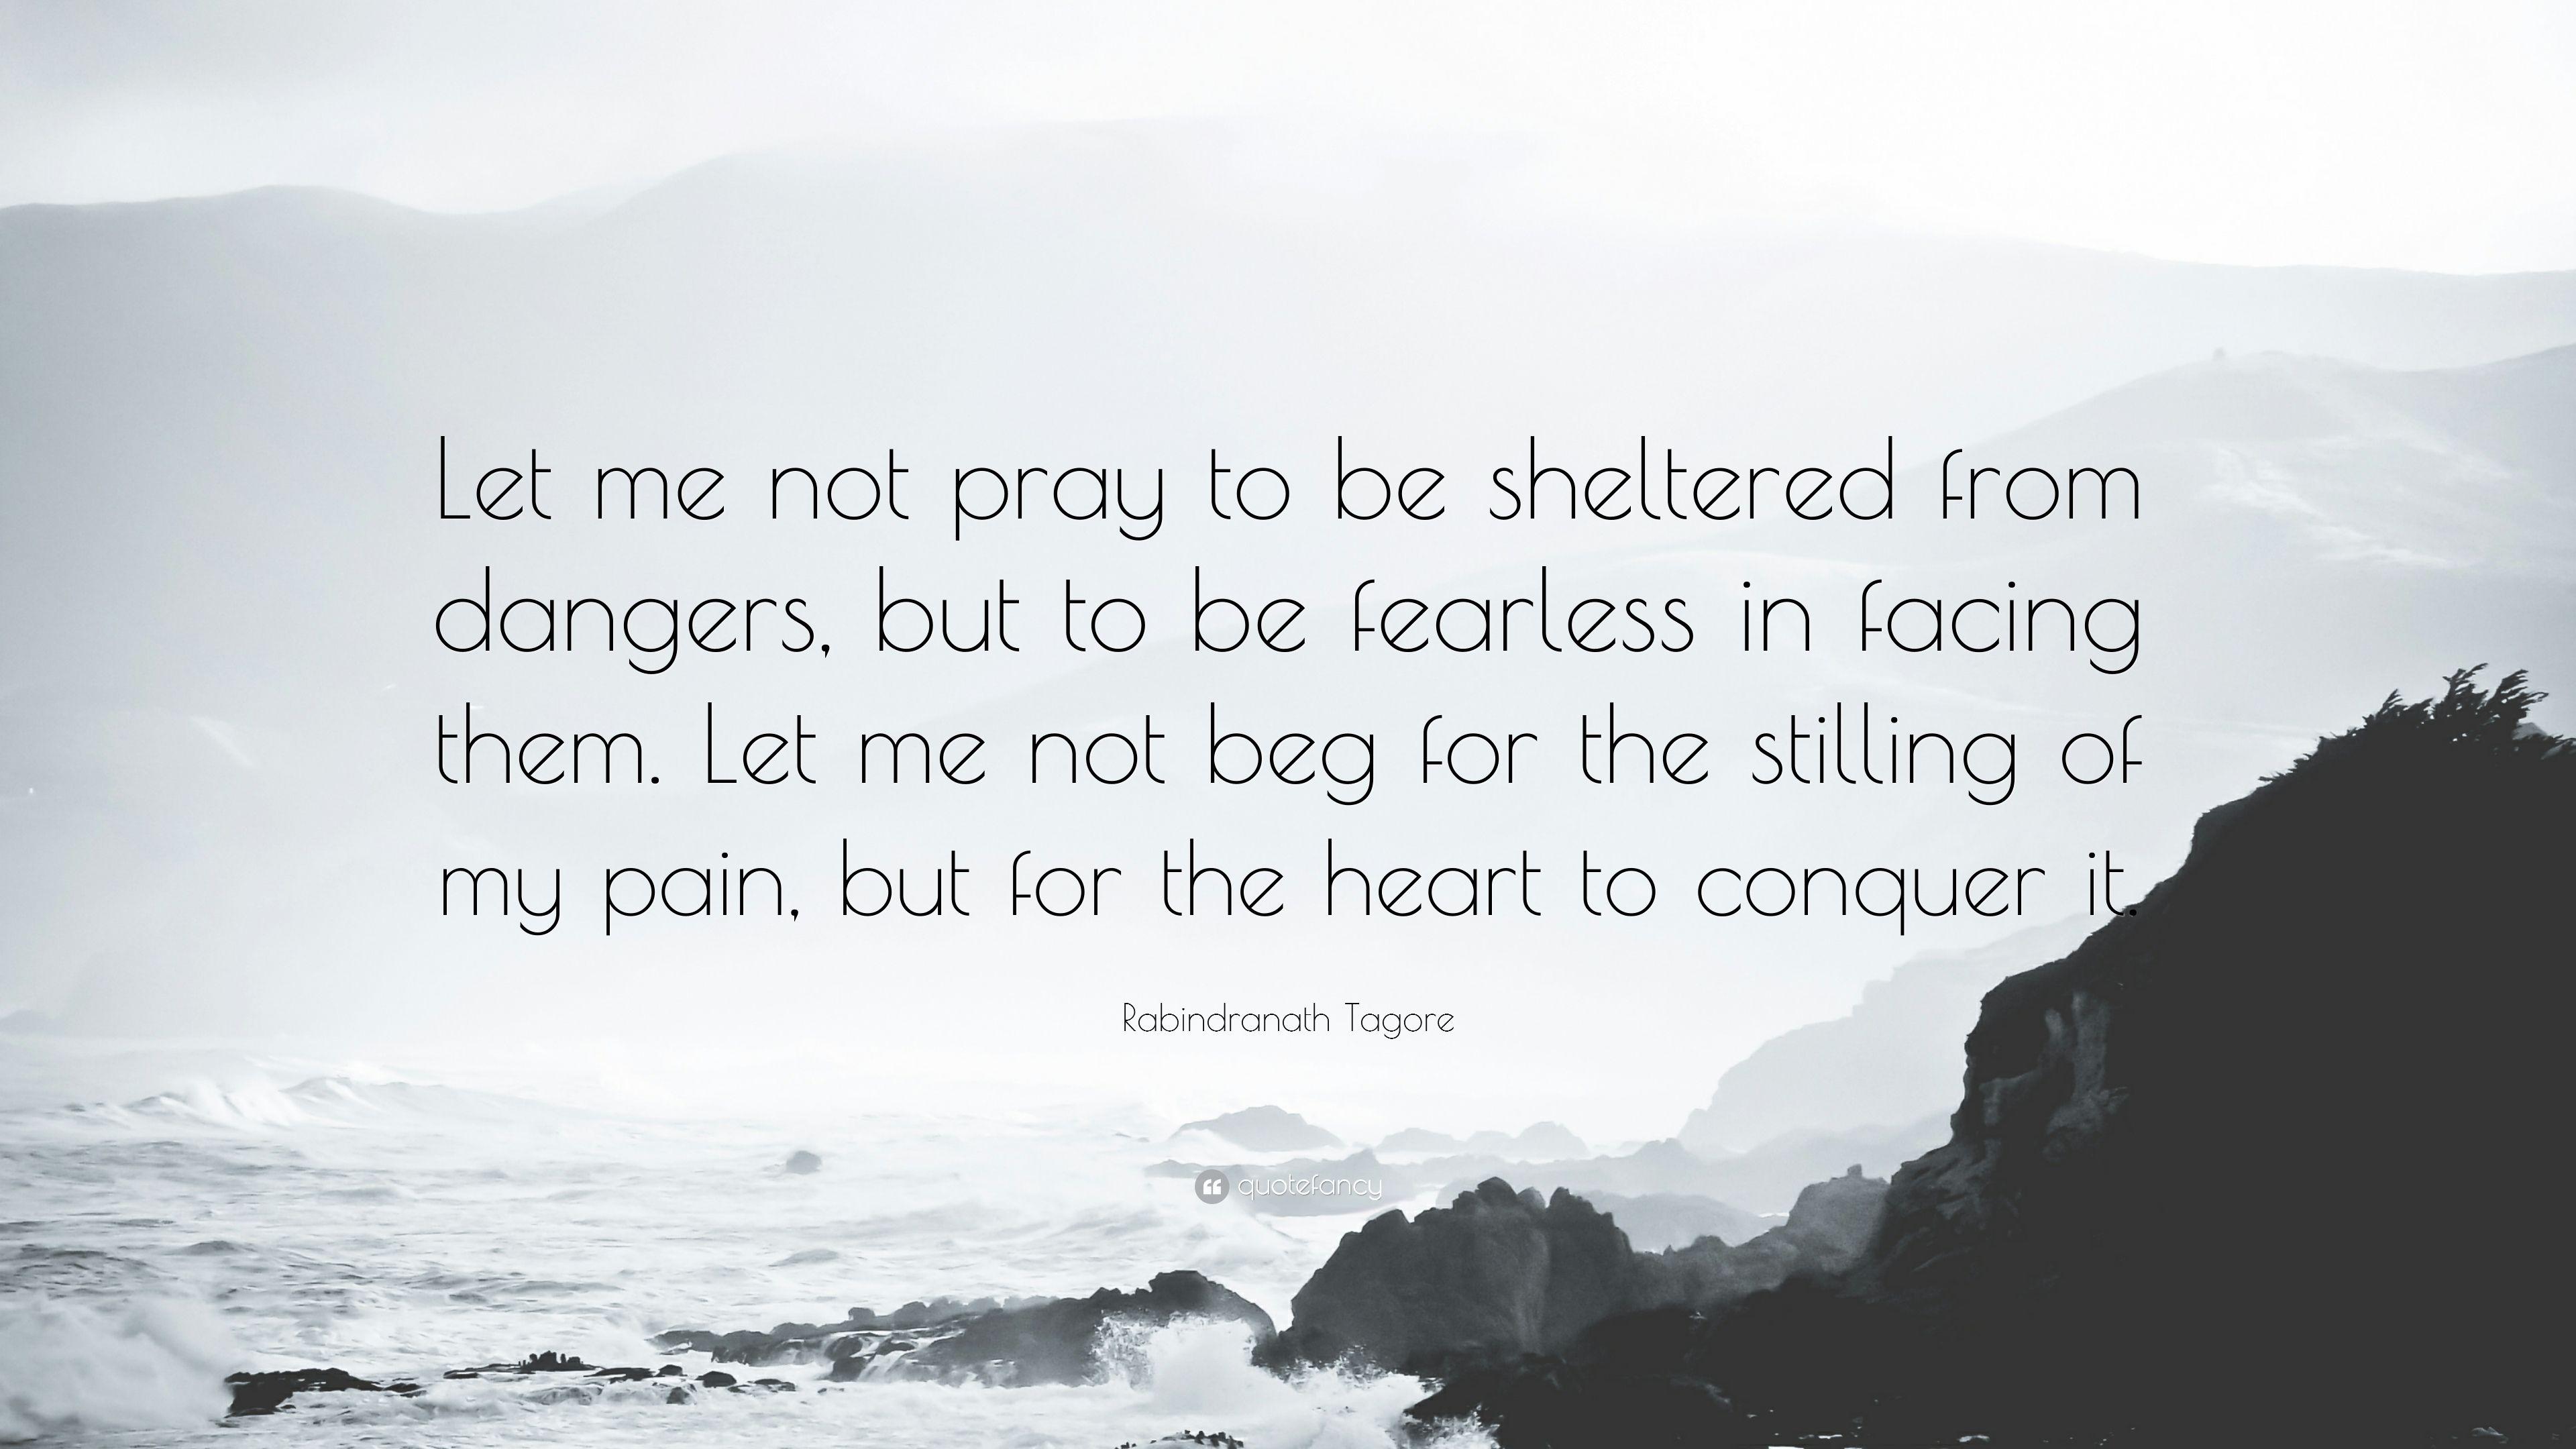 Rabindranath Tagore Quote: “Let me not pray to be sheltered